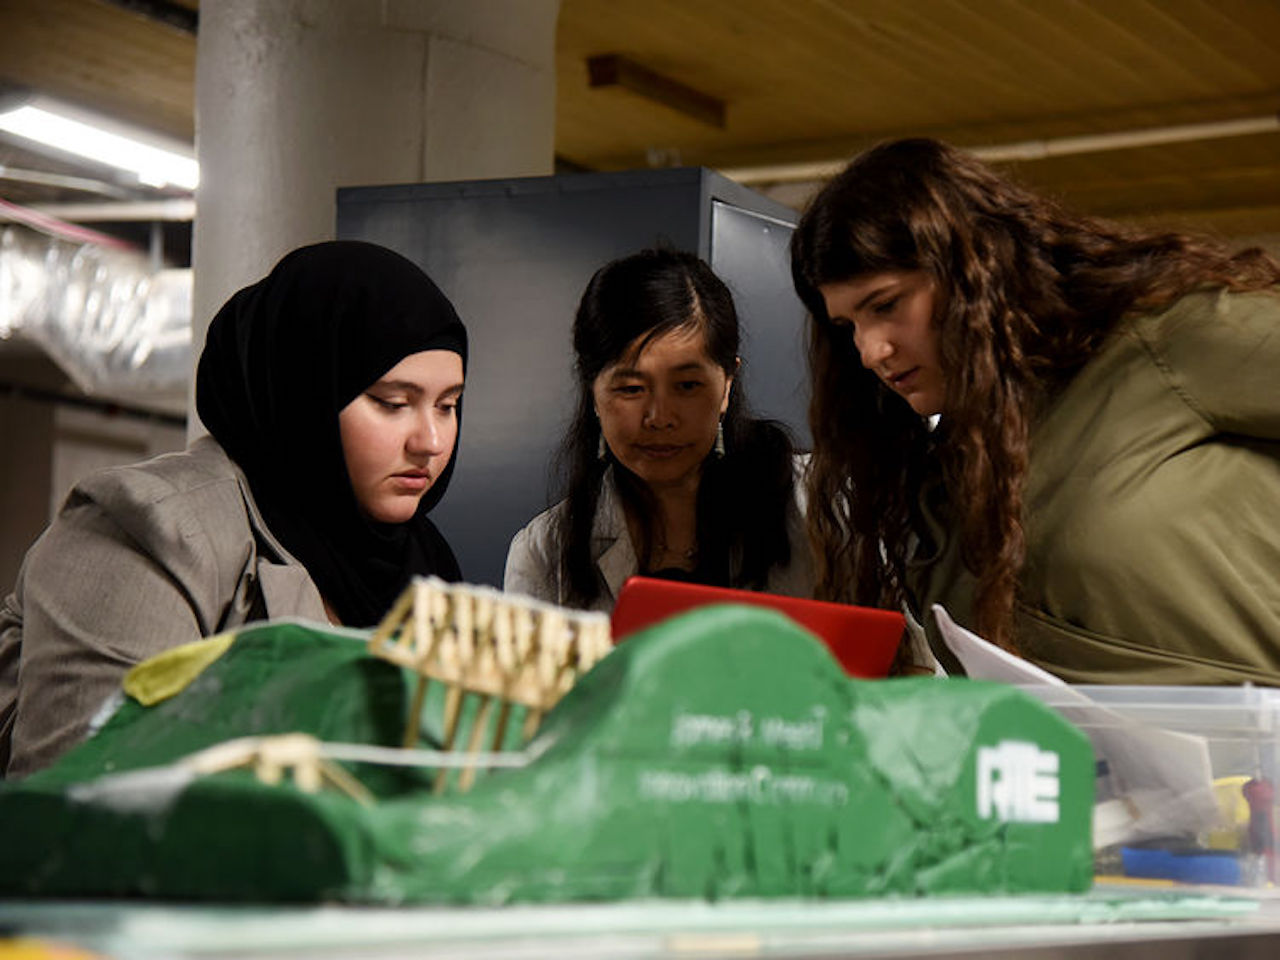 Penn State Altoona students Hagar Abdelaal (left) and Alyonna Vitulli (right) work with Shihui Shen, Professor of Rail Transportation Engineering, during the fourth annual Women in Engineering Design competition. (Credit: Jacob Narup of Penn State)